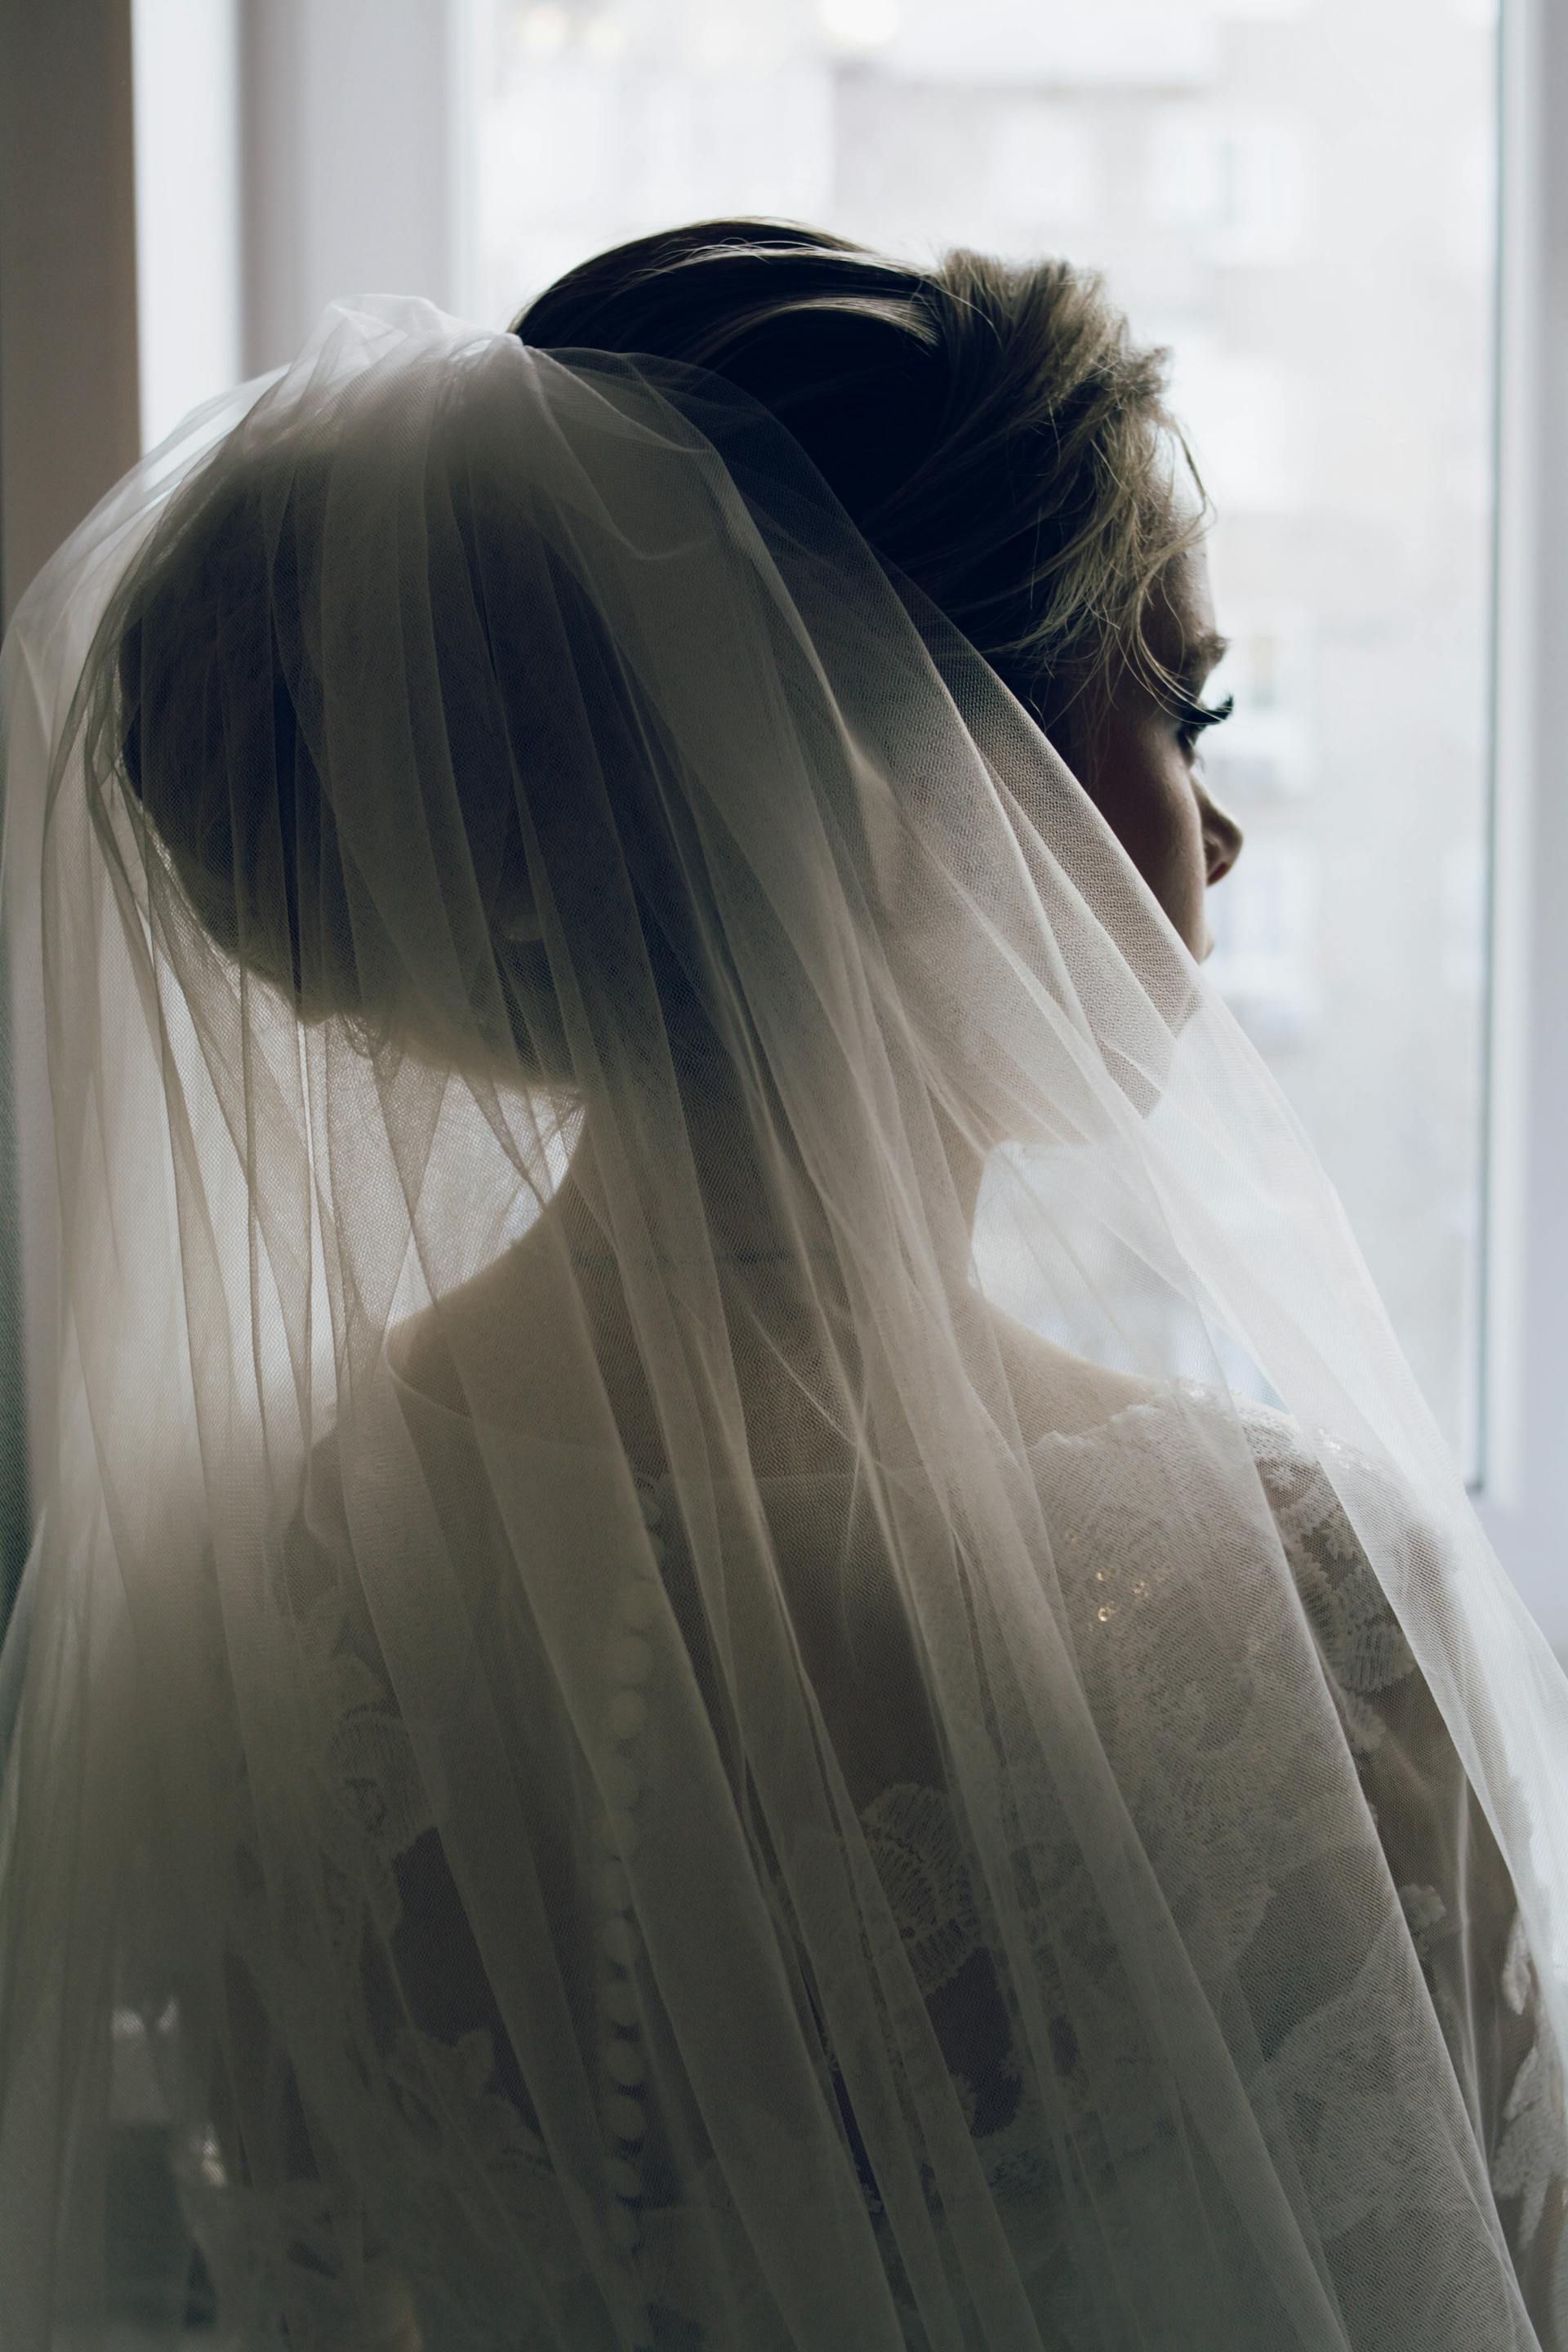 A bride in a wedding dress and veil looking through the window | Source: Pexels